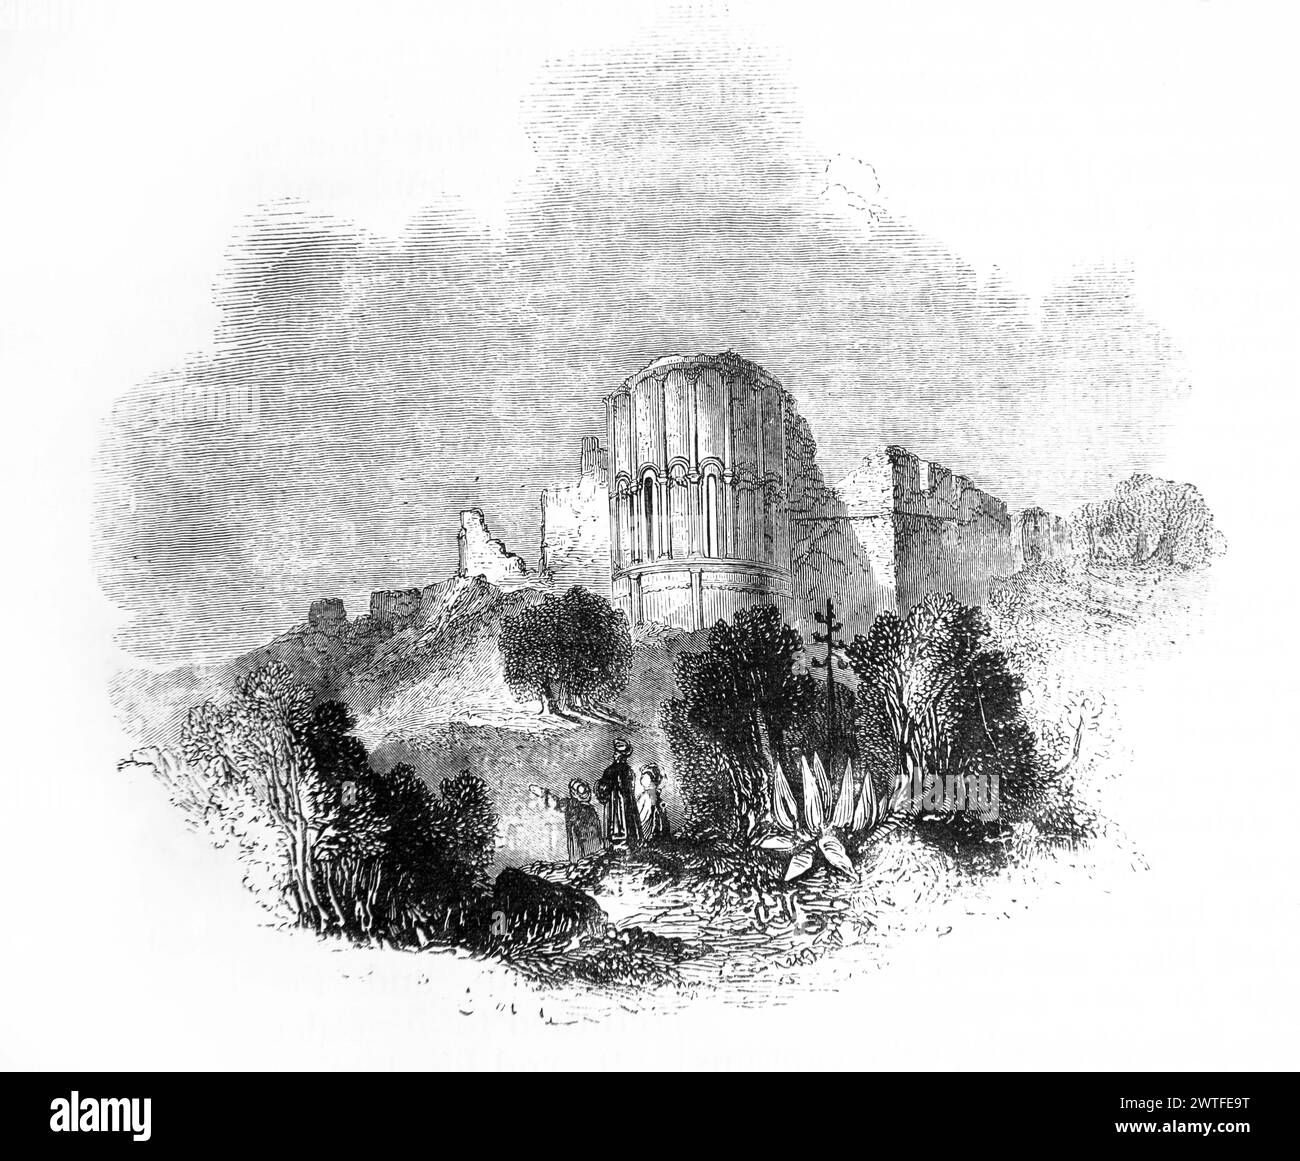 Illustration of Samaria-Sebaste Ruins in Palestine from Laborde's Syria in Antique 19th Century Illustrated Family Bible Stock Photo